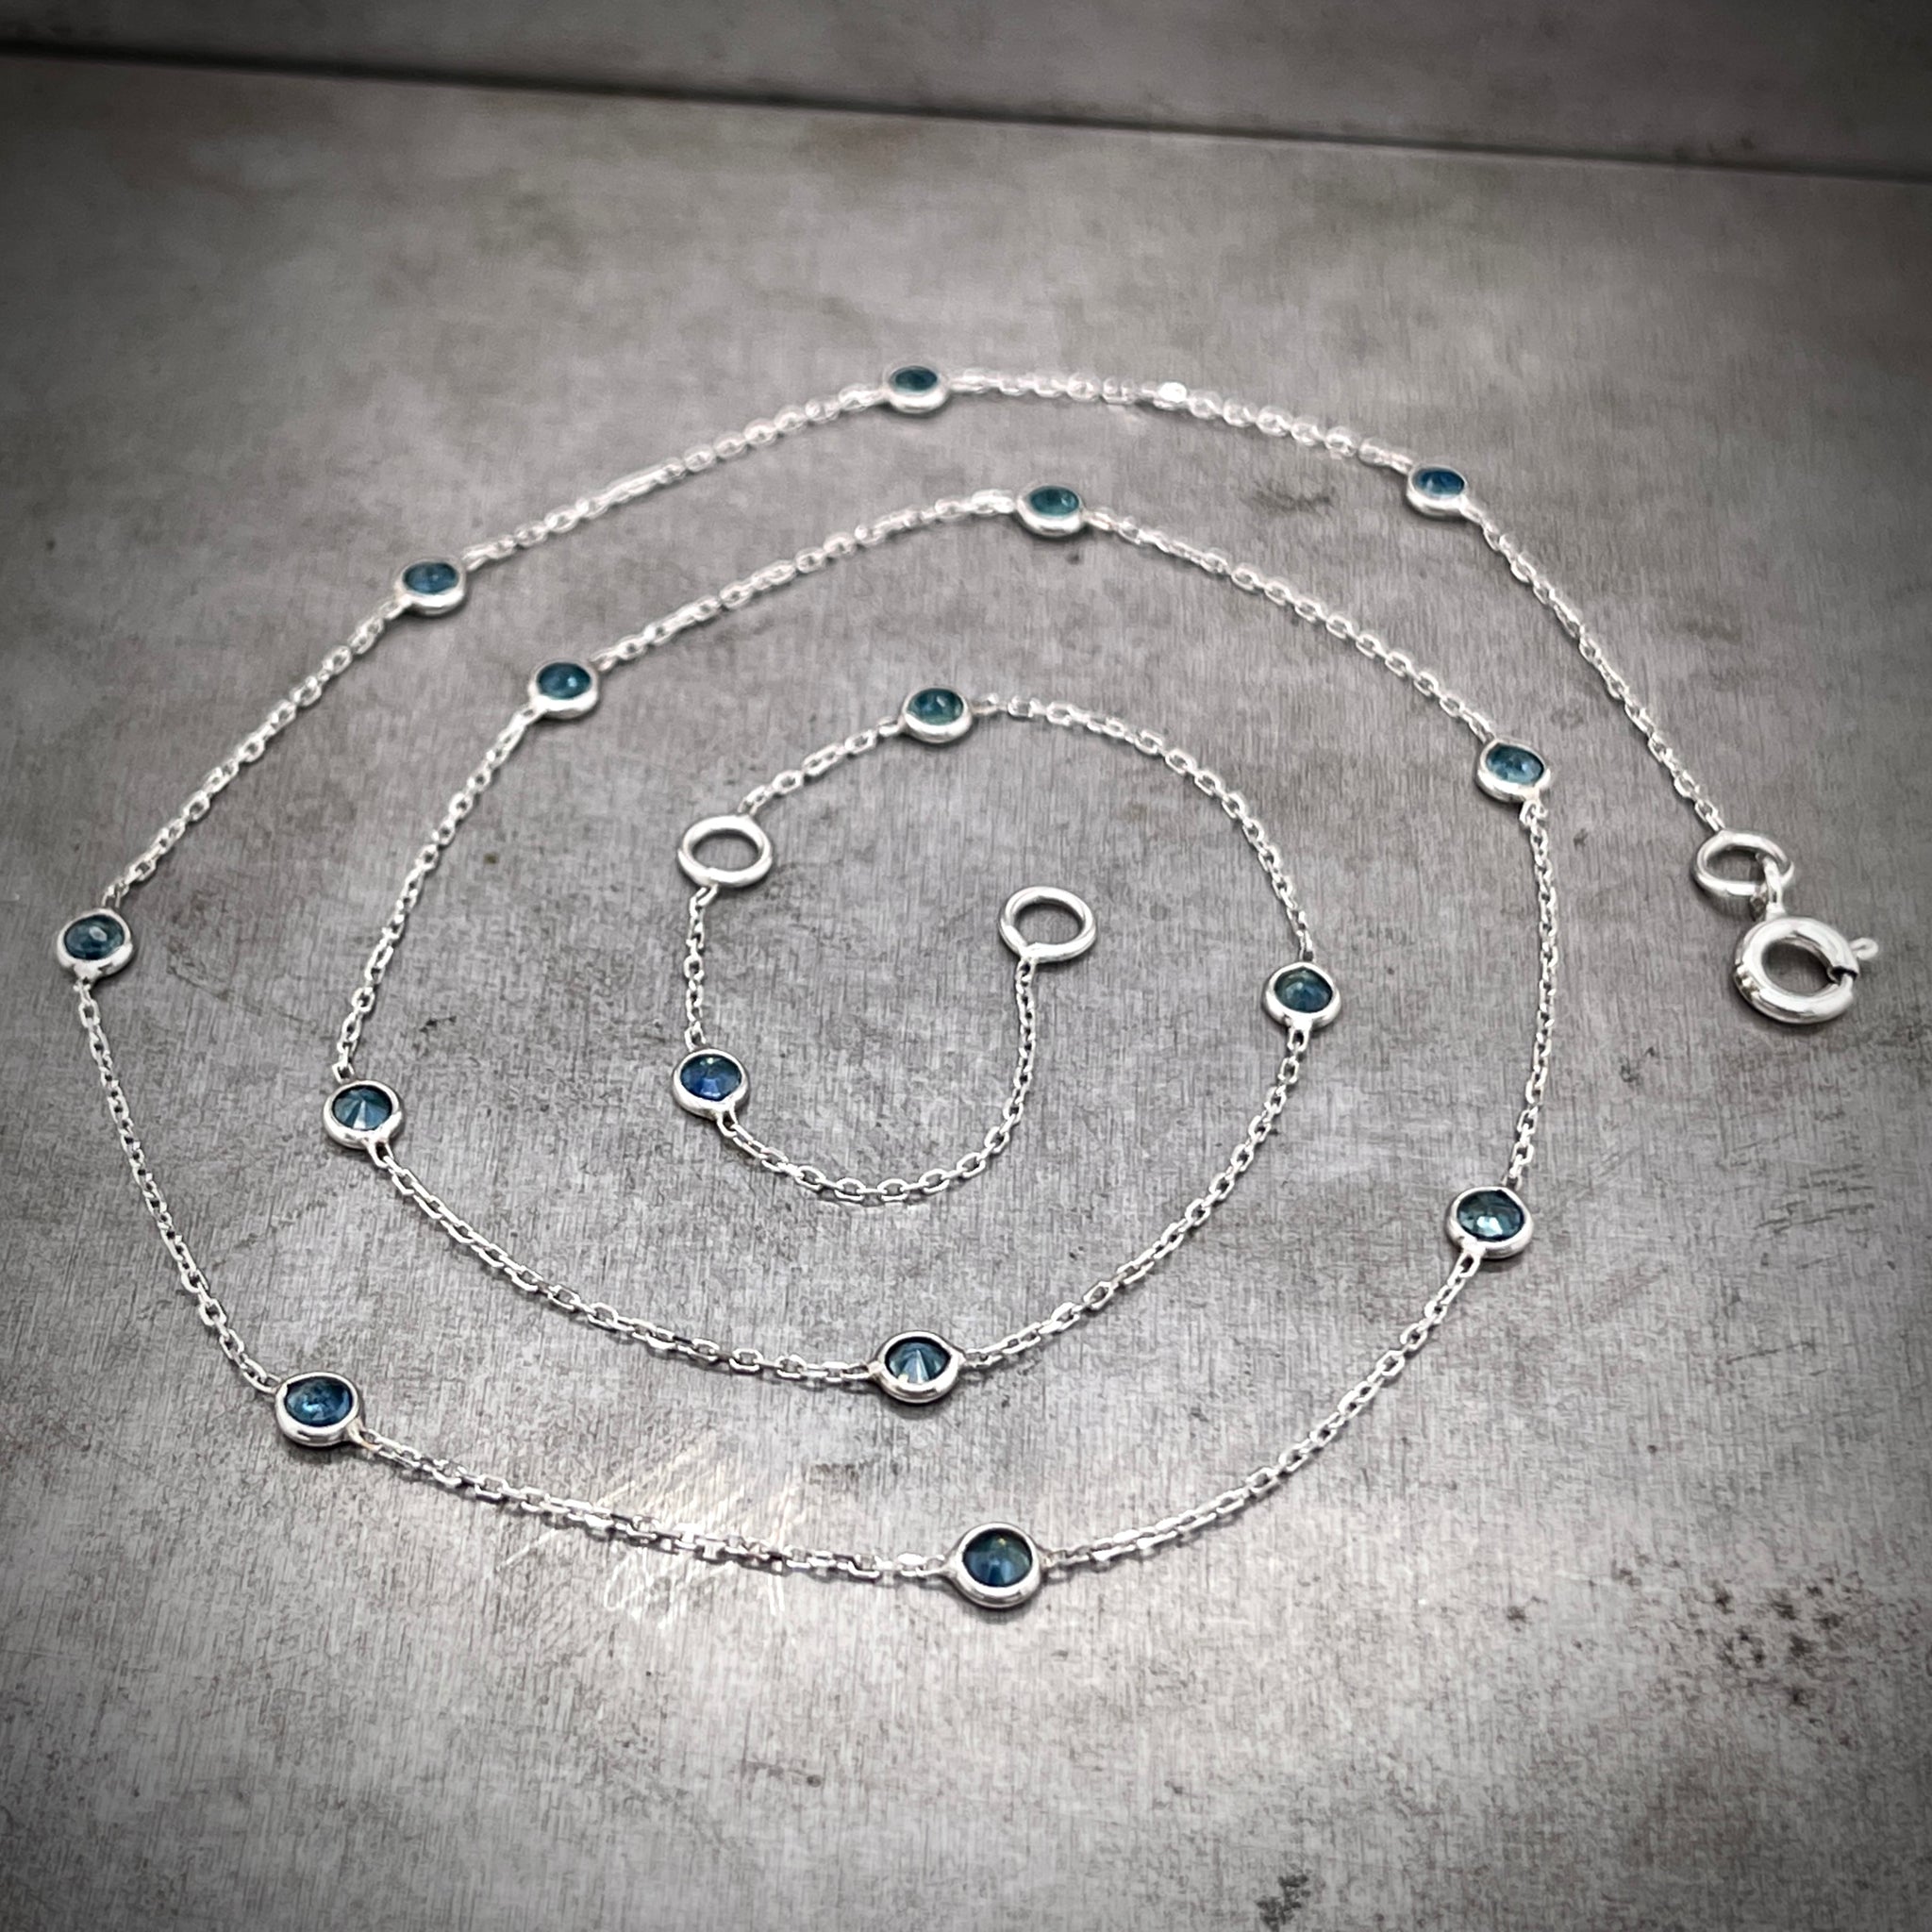 Full view of White Gold and Sapphire Necklace laying in a spiral on a gray steel background. About every inch this chain features a small rose cut blue sapphire that is bezel set in white gold. This necklace features 15 sapphires.